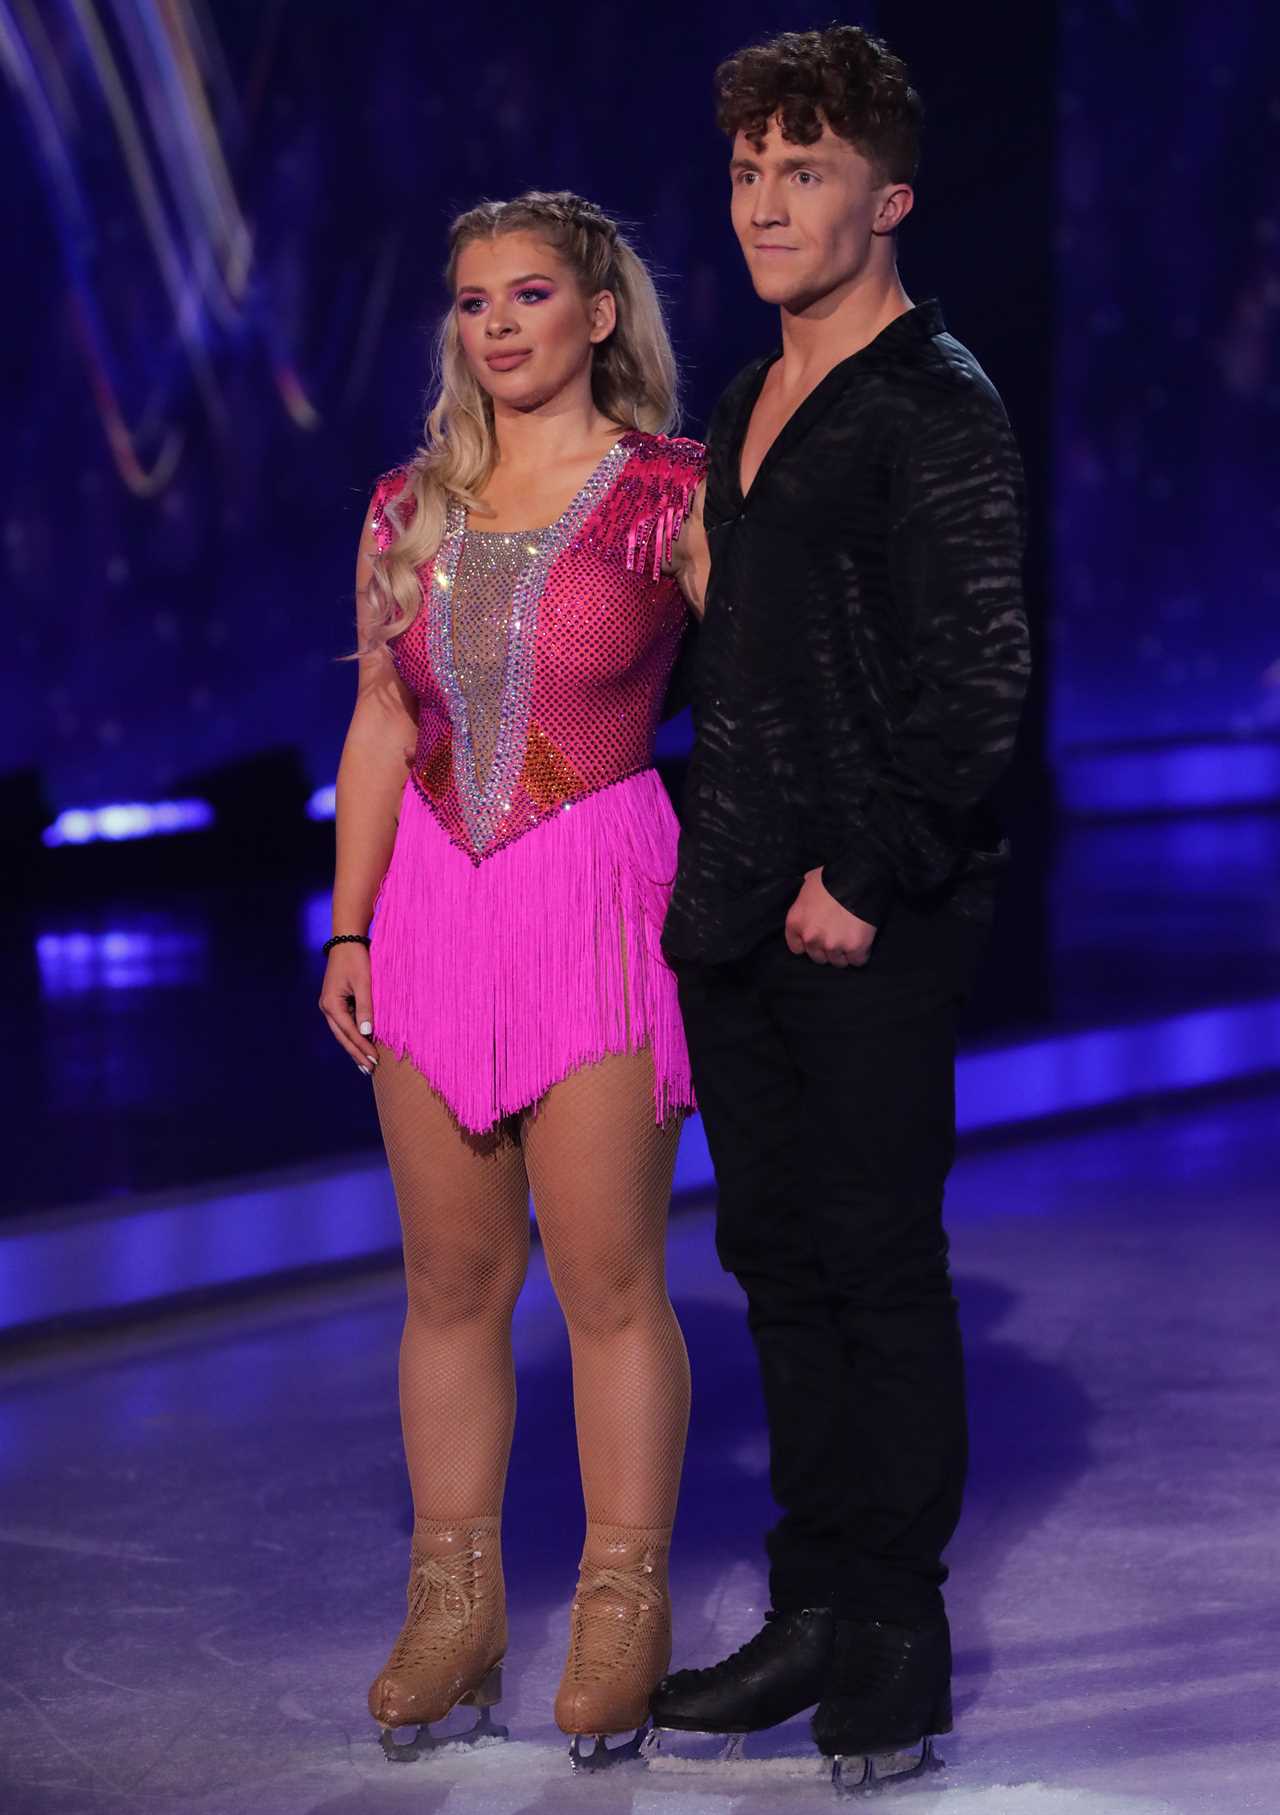 Dancing on Ice fans have slammed the show as a 'fix' after Liberty Poole got voted off tonight